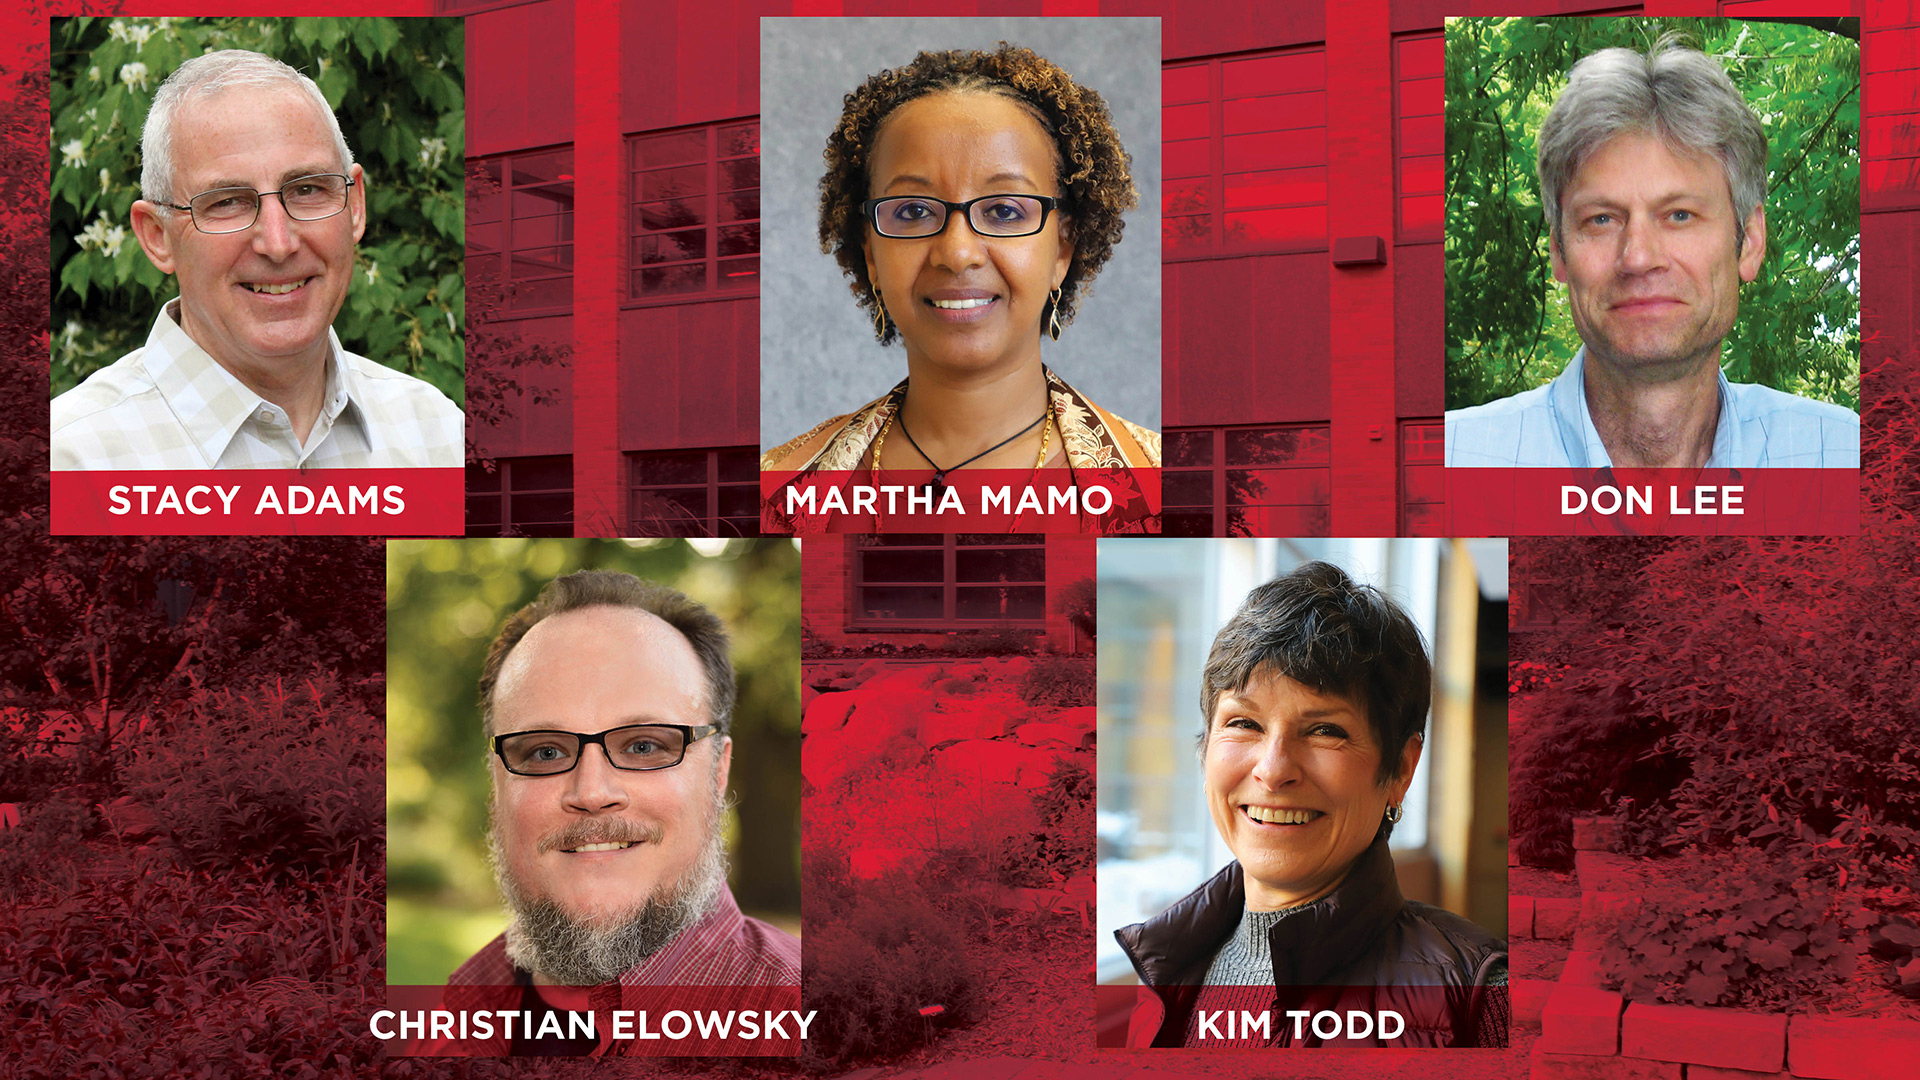 Stacy Adams, Martha Mamo, Don Lee, Christian Elowsky and Kim Todd, University of Nebraska–Lincoln Department of Agronomy and Horticulture faculty, were honored for their support to students during the annual Parents' Recognition Awards luncheon.